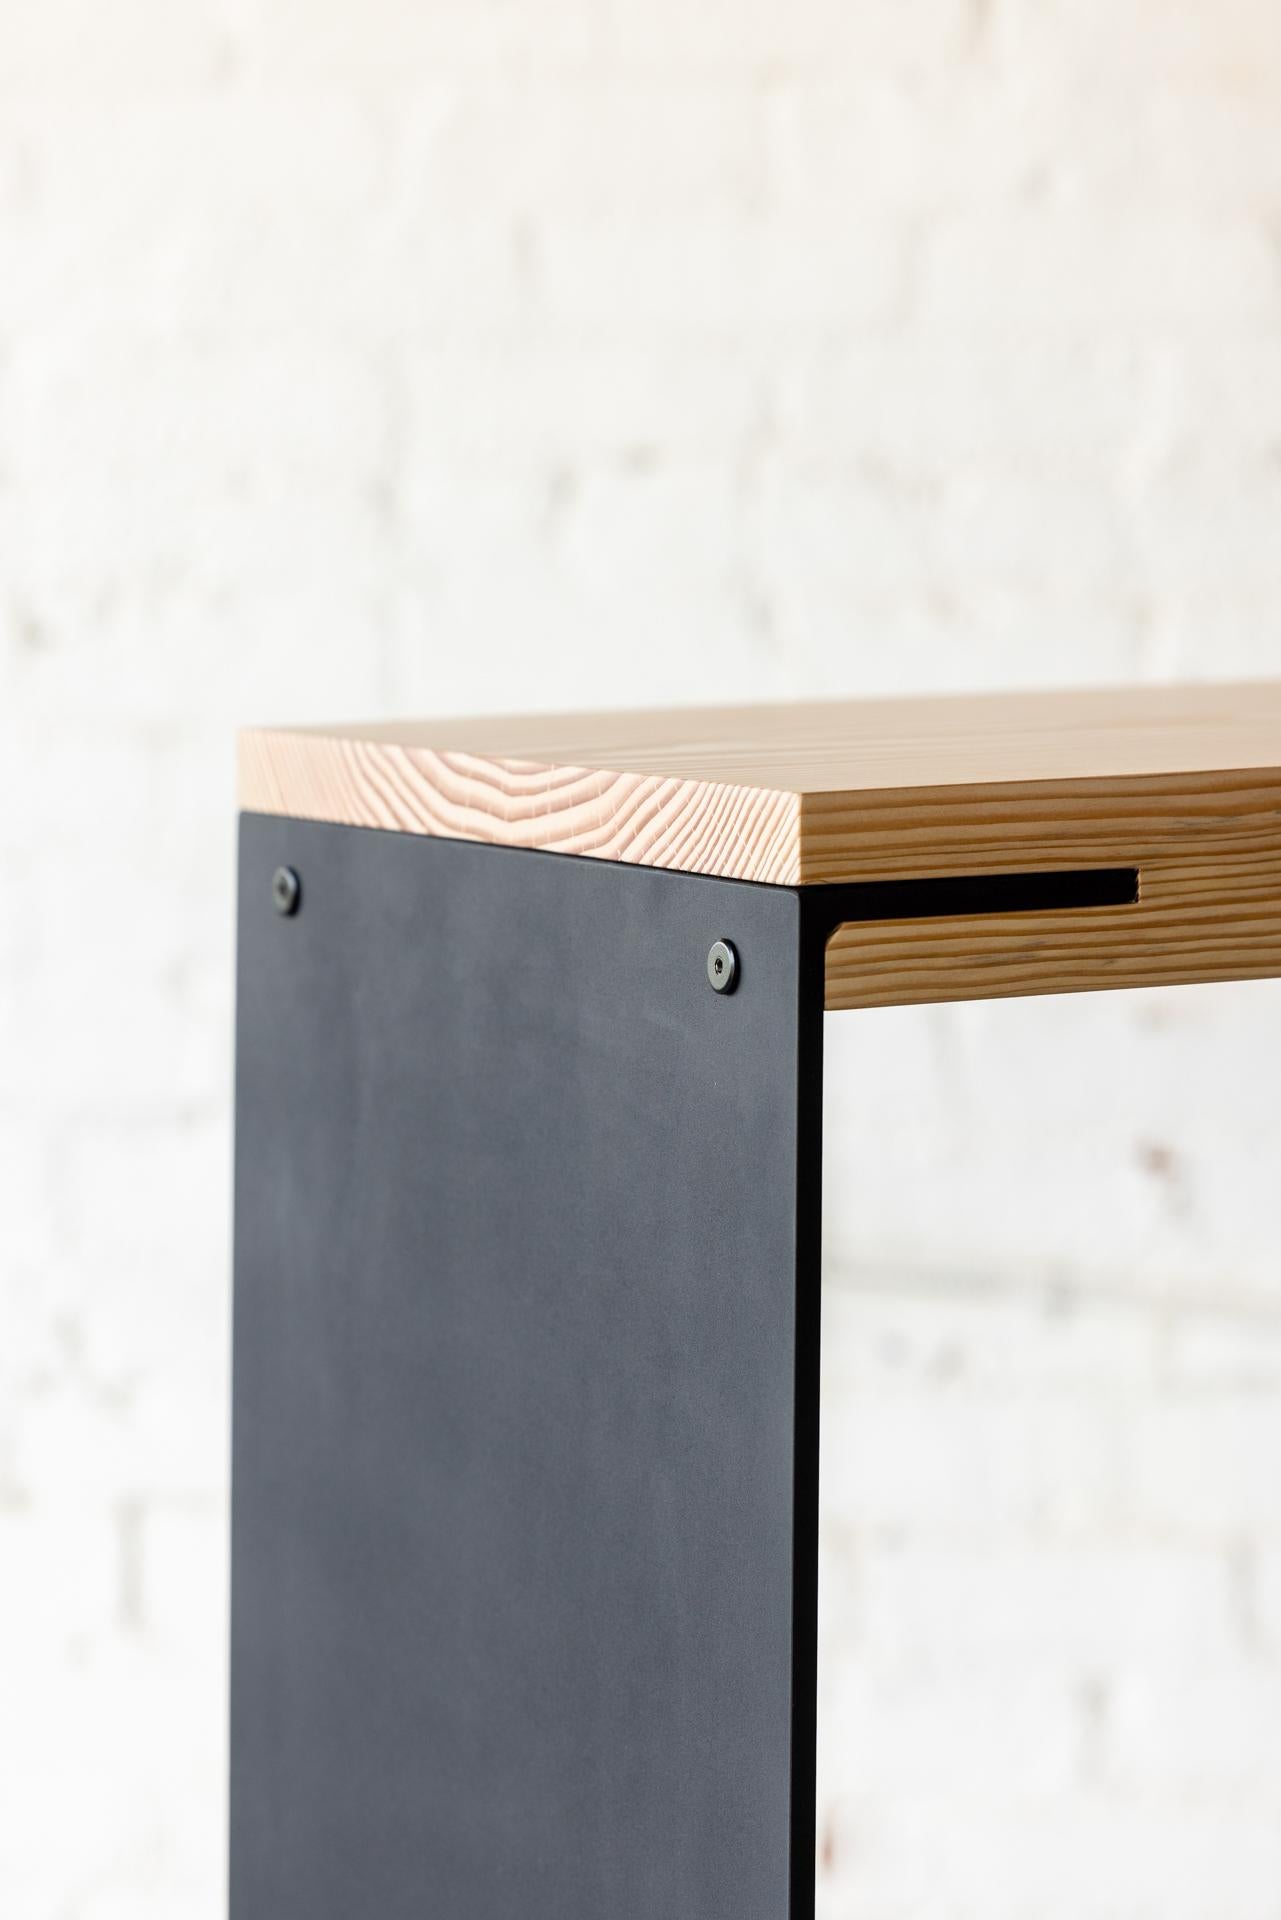 Ash Kai Console with Modern Wood and Black Steel Legs by Autonomous Furniture For Sale